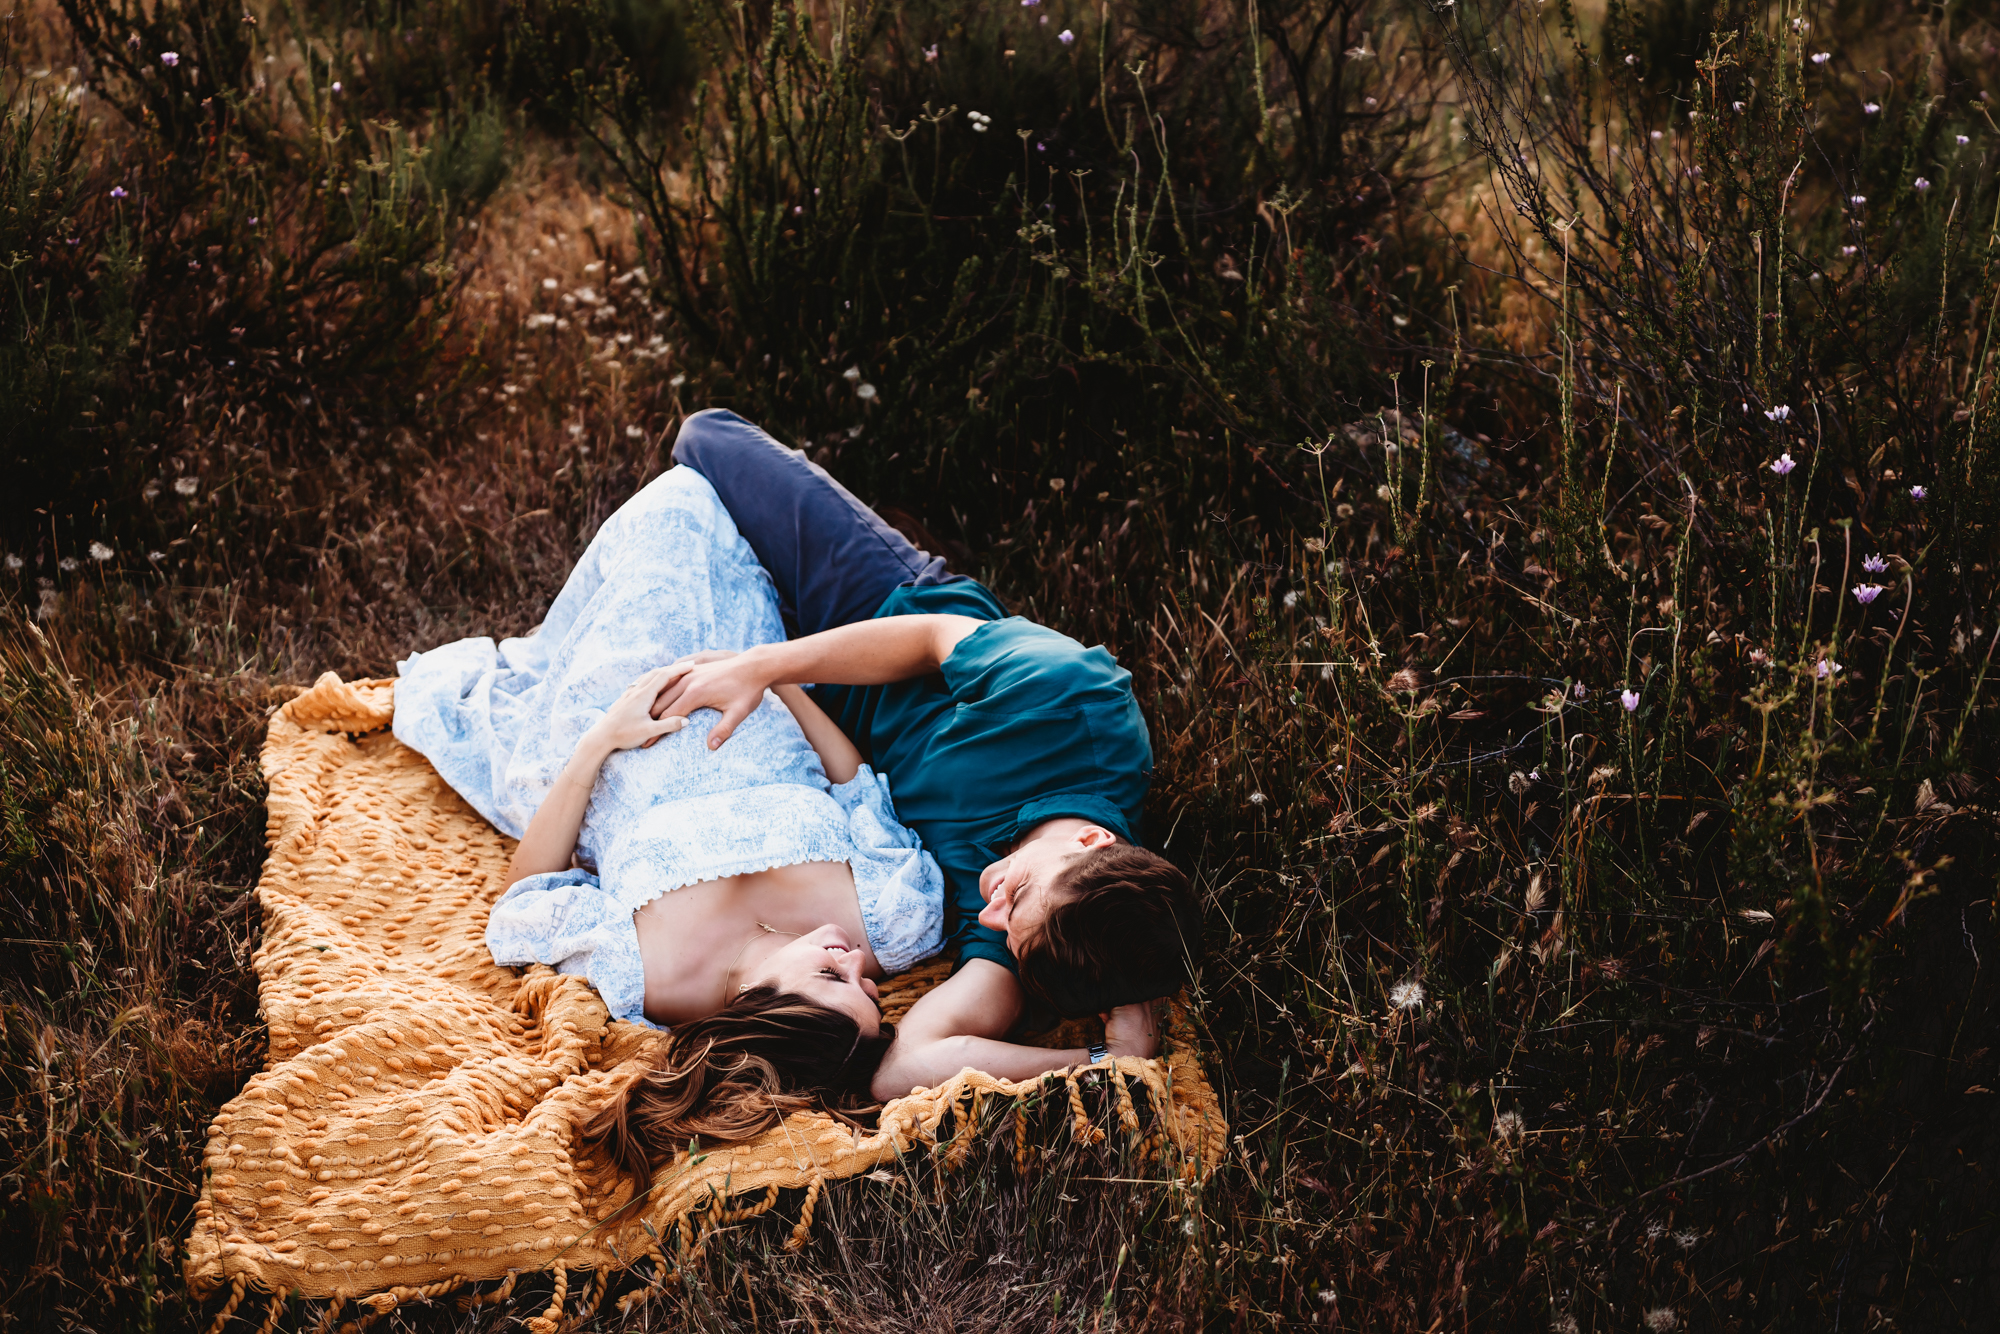 A pregnant woman wearing a long dress lays with her husband on a yellow blanket in a field of grass and wildflowers. This is during a San Diego lifestyle maternity photography session by Love Michelle Photography.